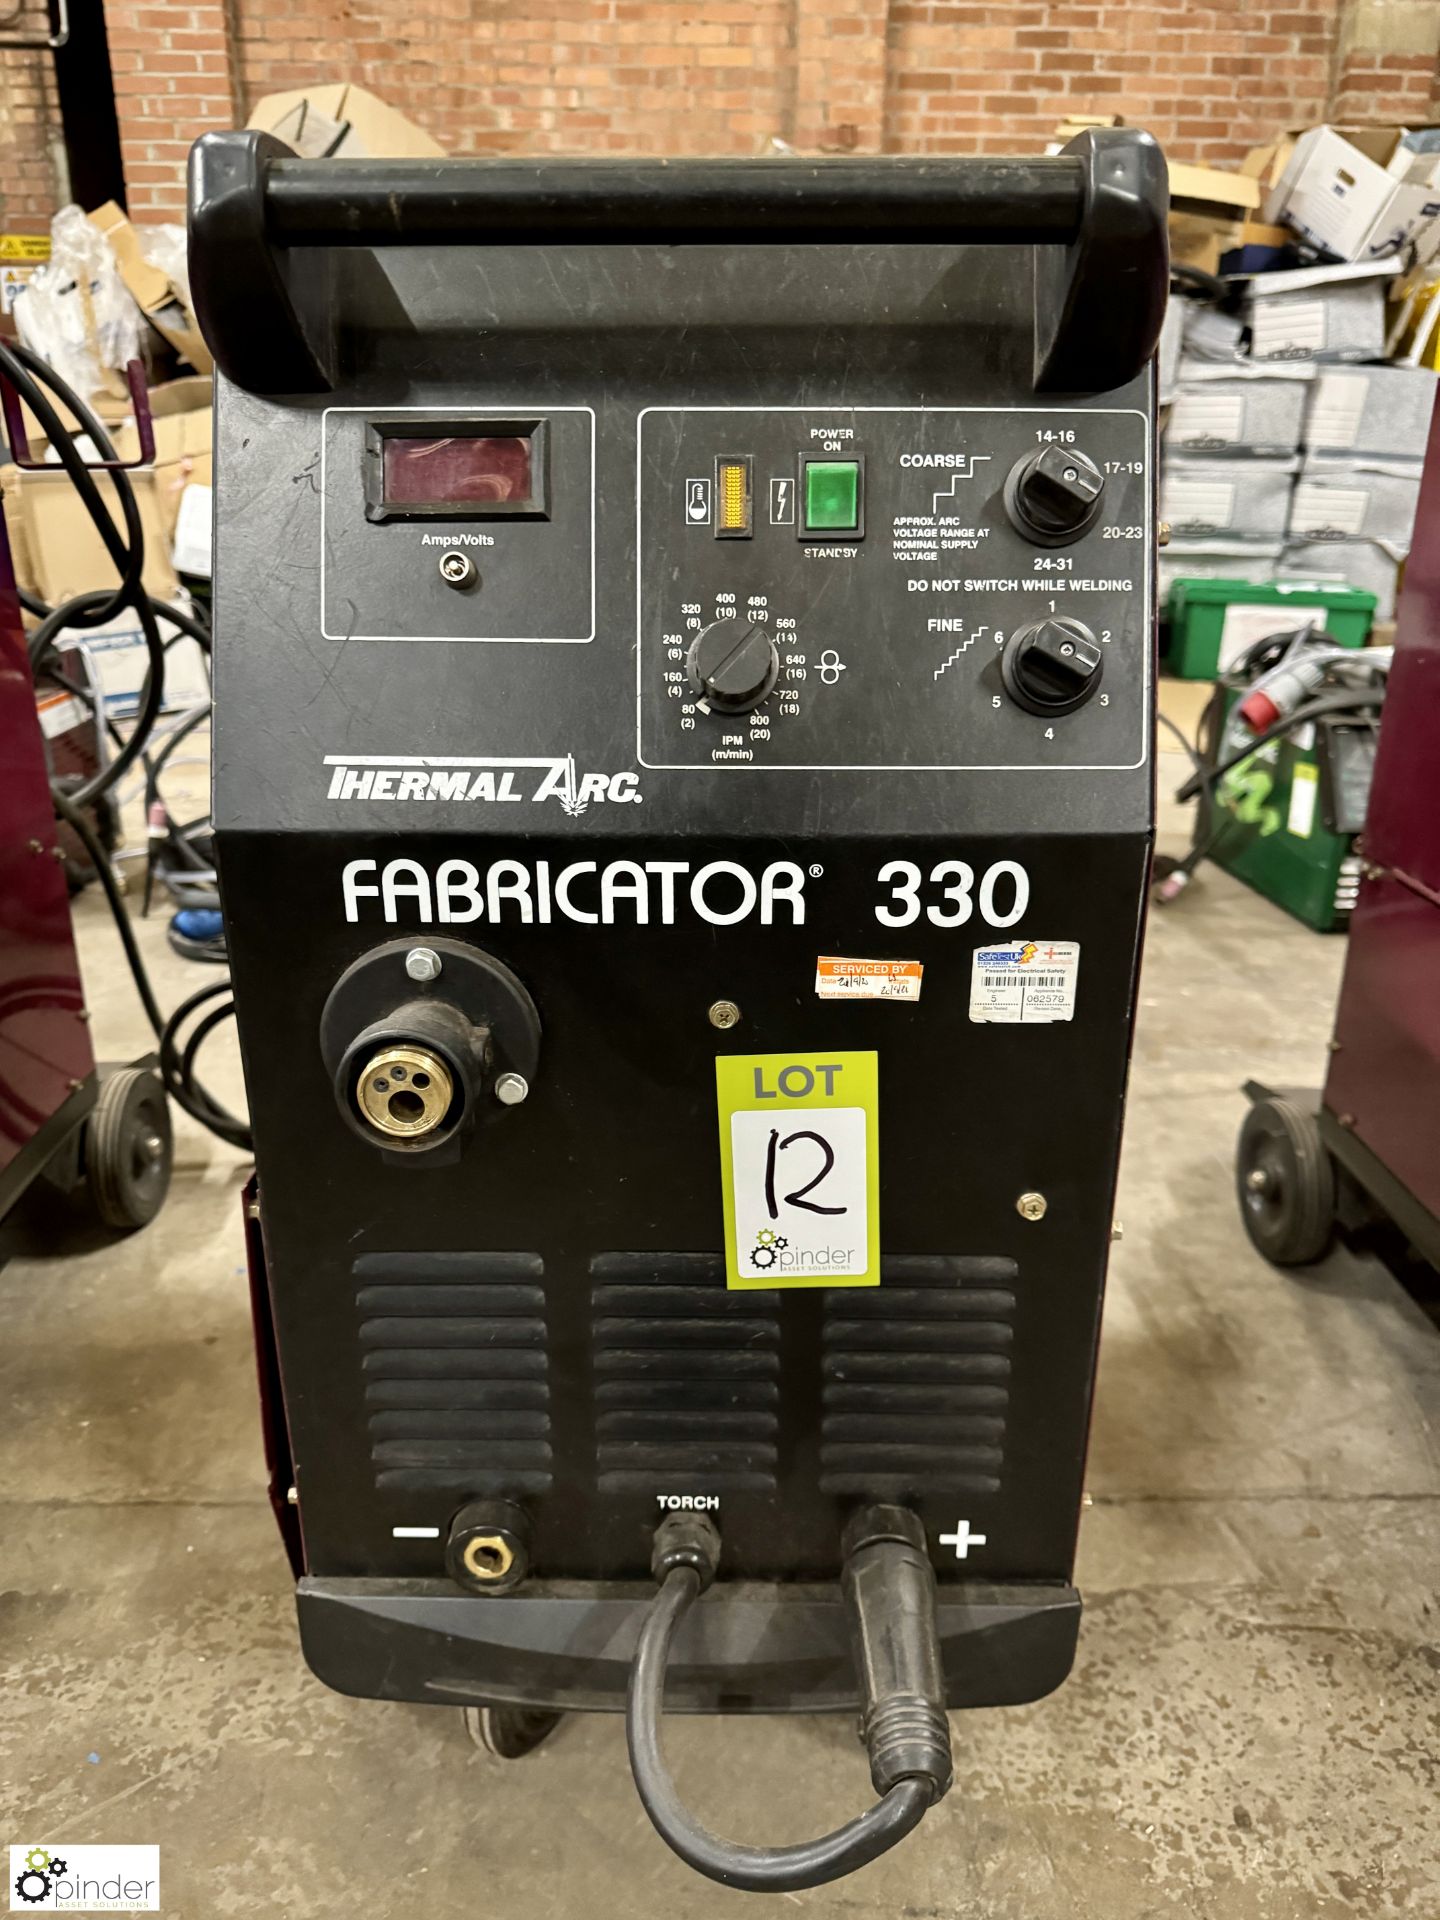 Thermal Arc Fabricator 330 Arc Welding Set, 300amp, 415volts - Image 2 of 4